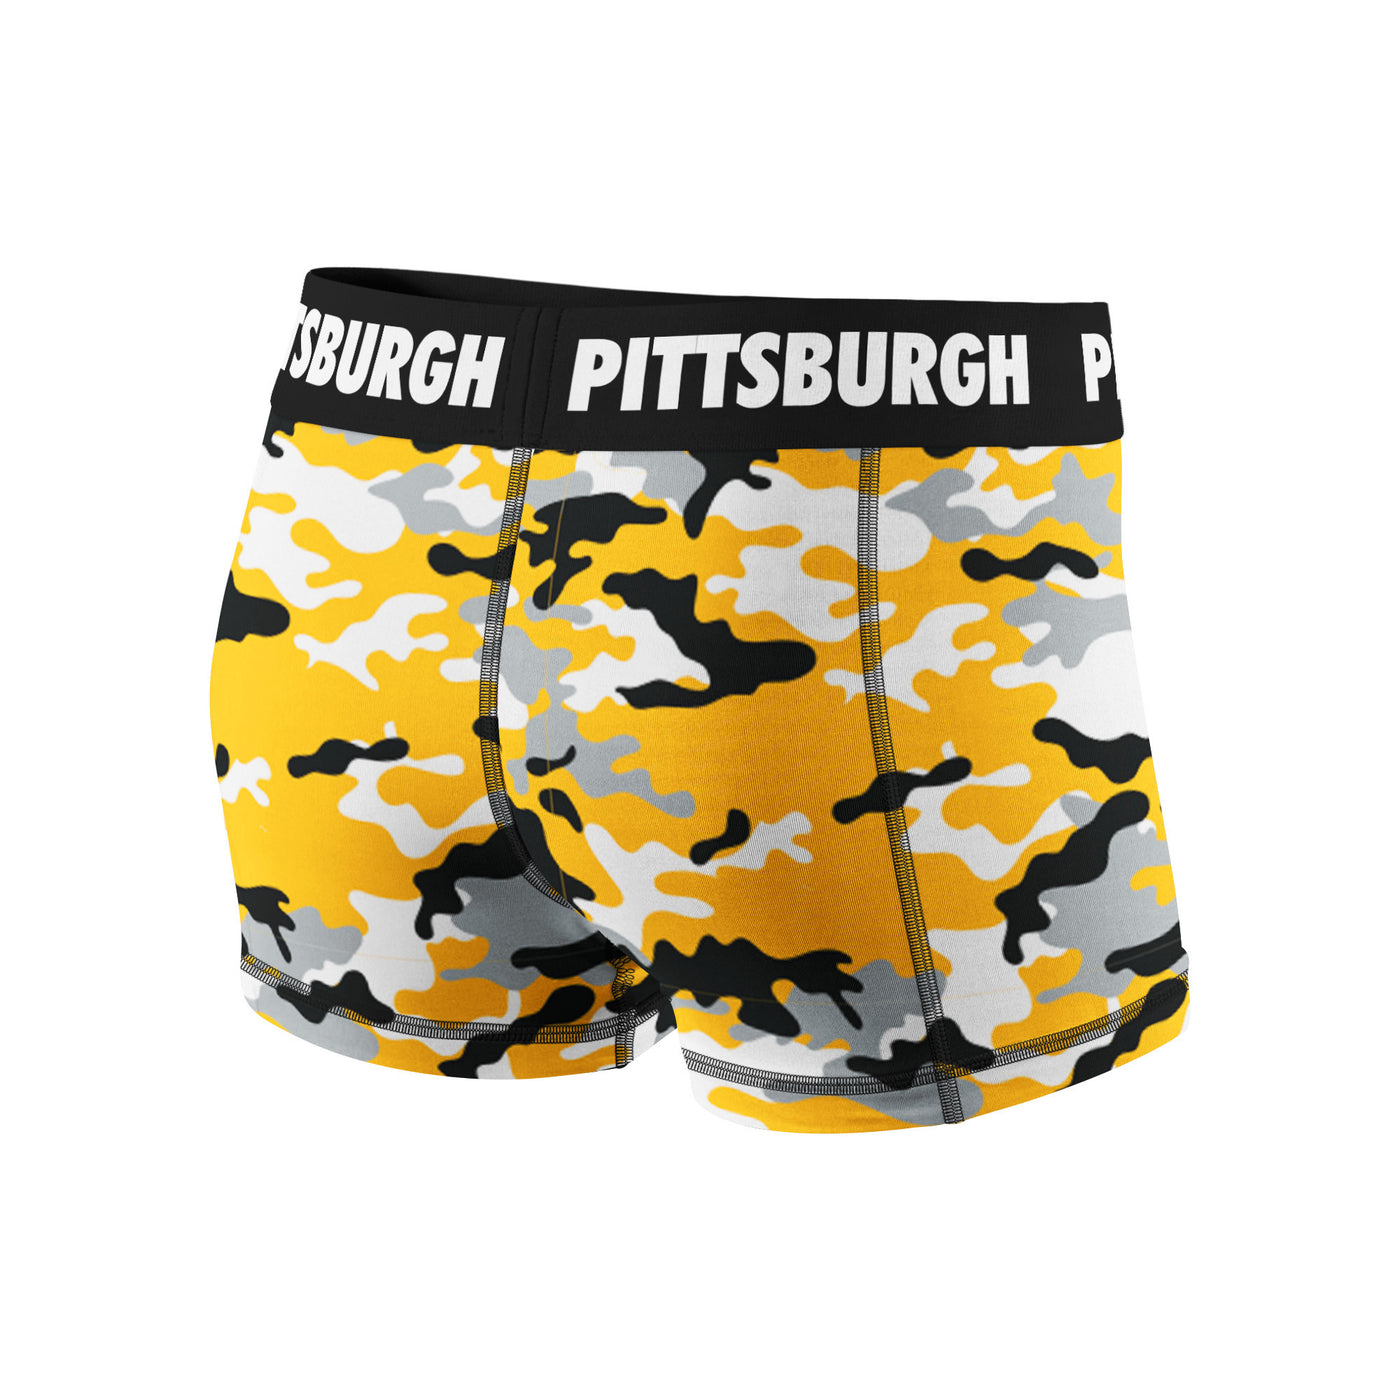 Pittsburgh Camo Classic Fitness Shorts